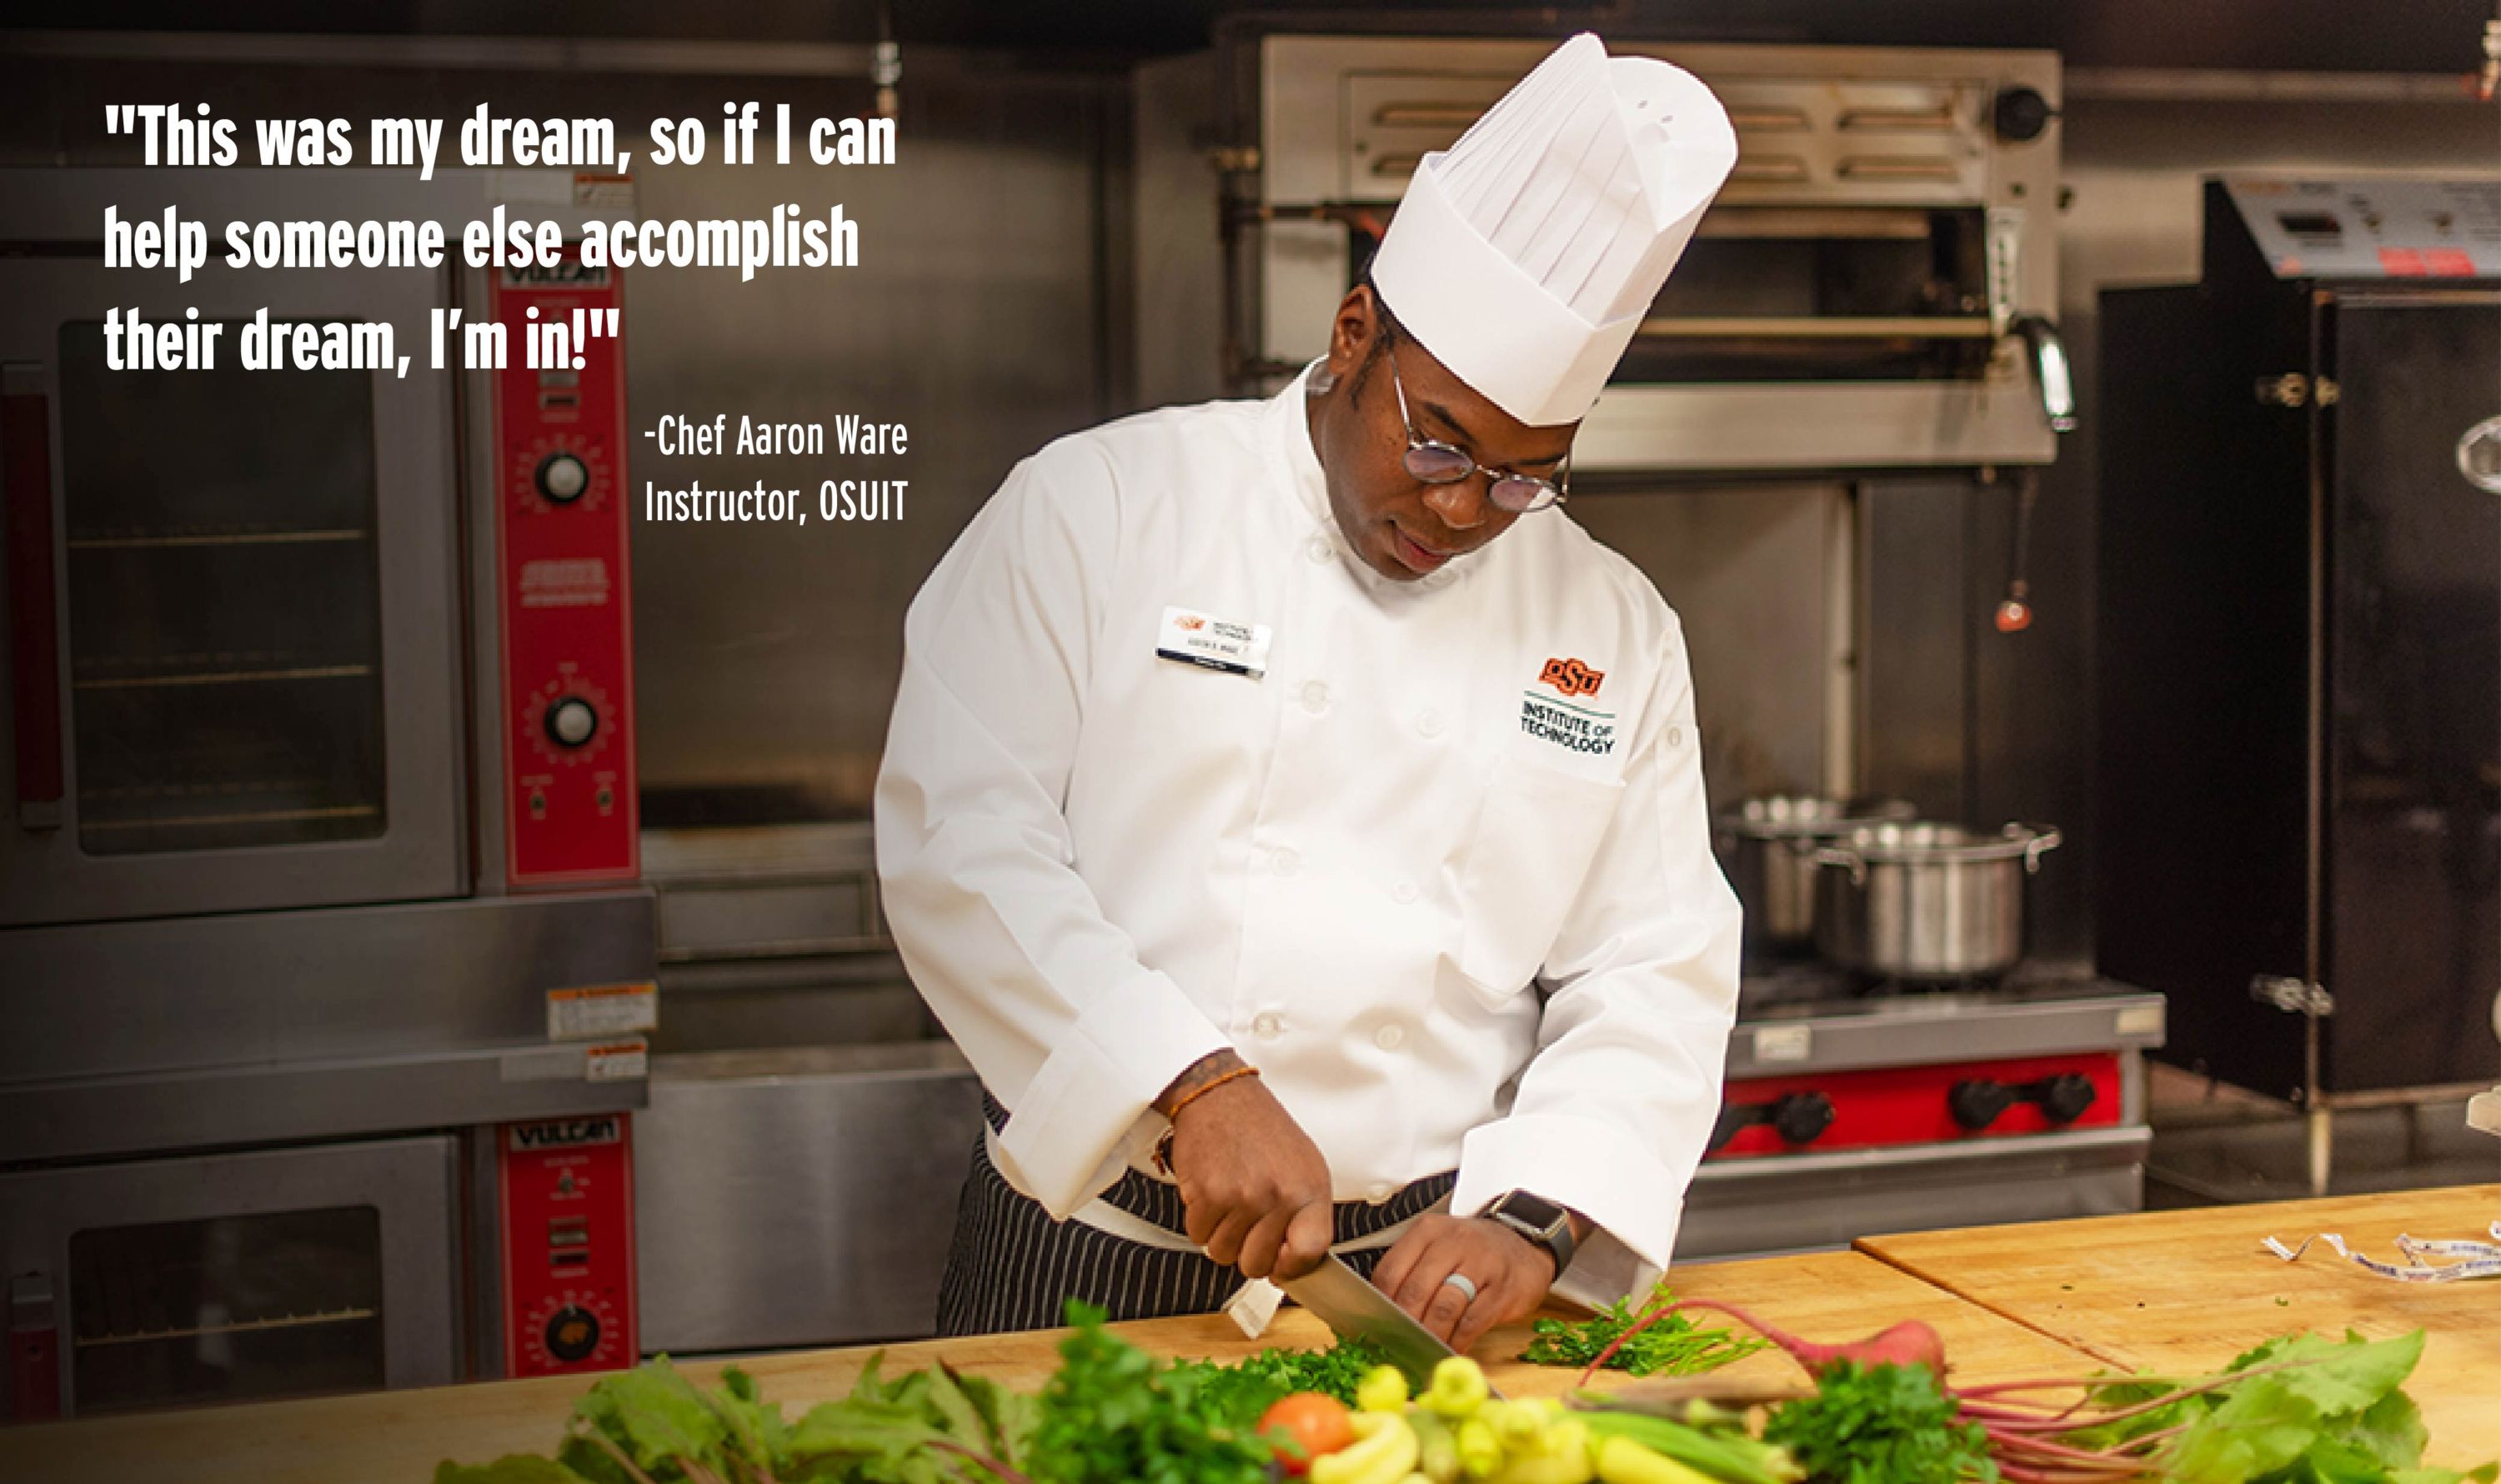 Culinary arts offer Oklahomans a fulfilling future for those interested in the hospitality industry